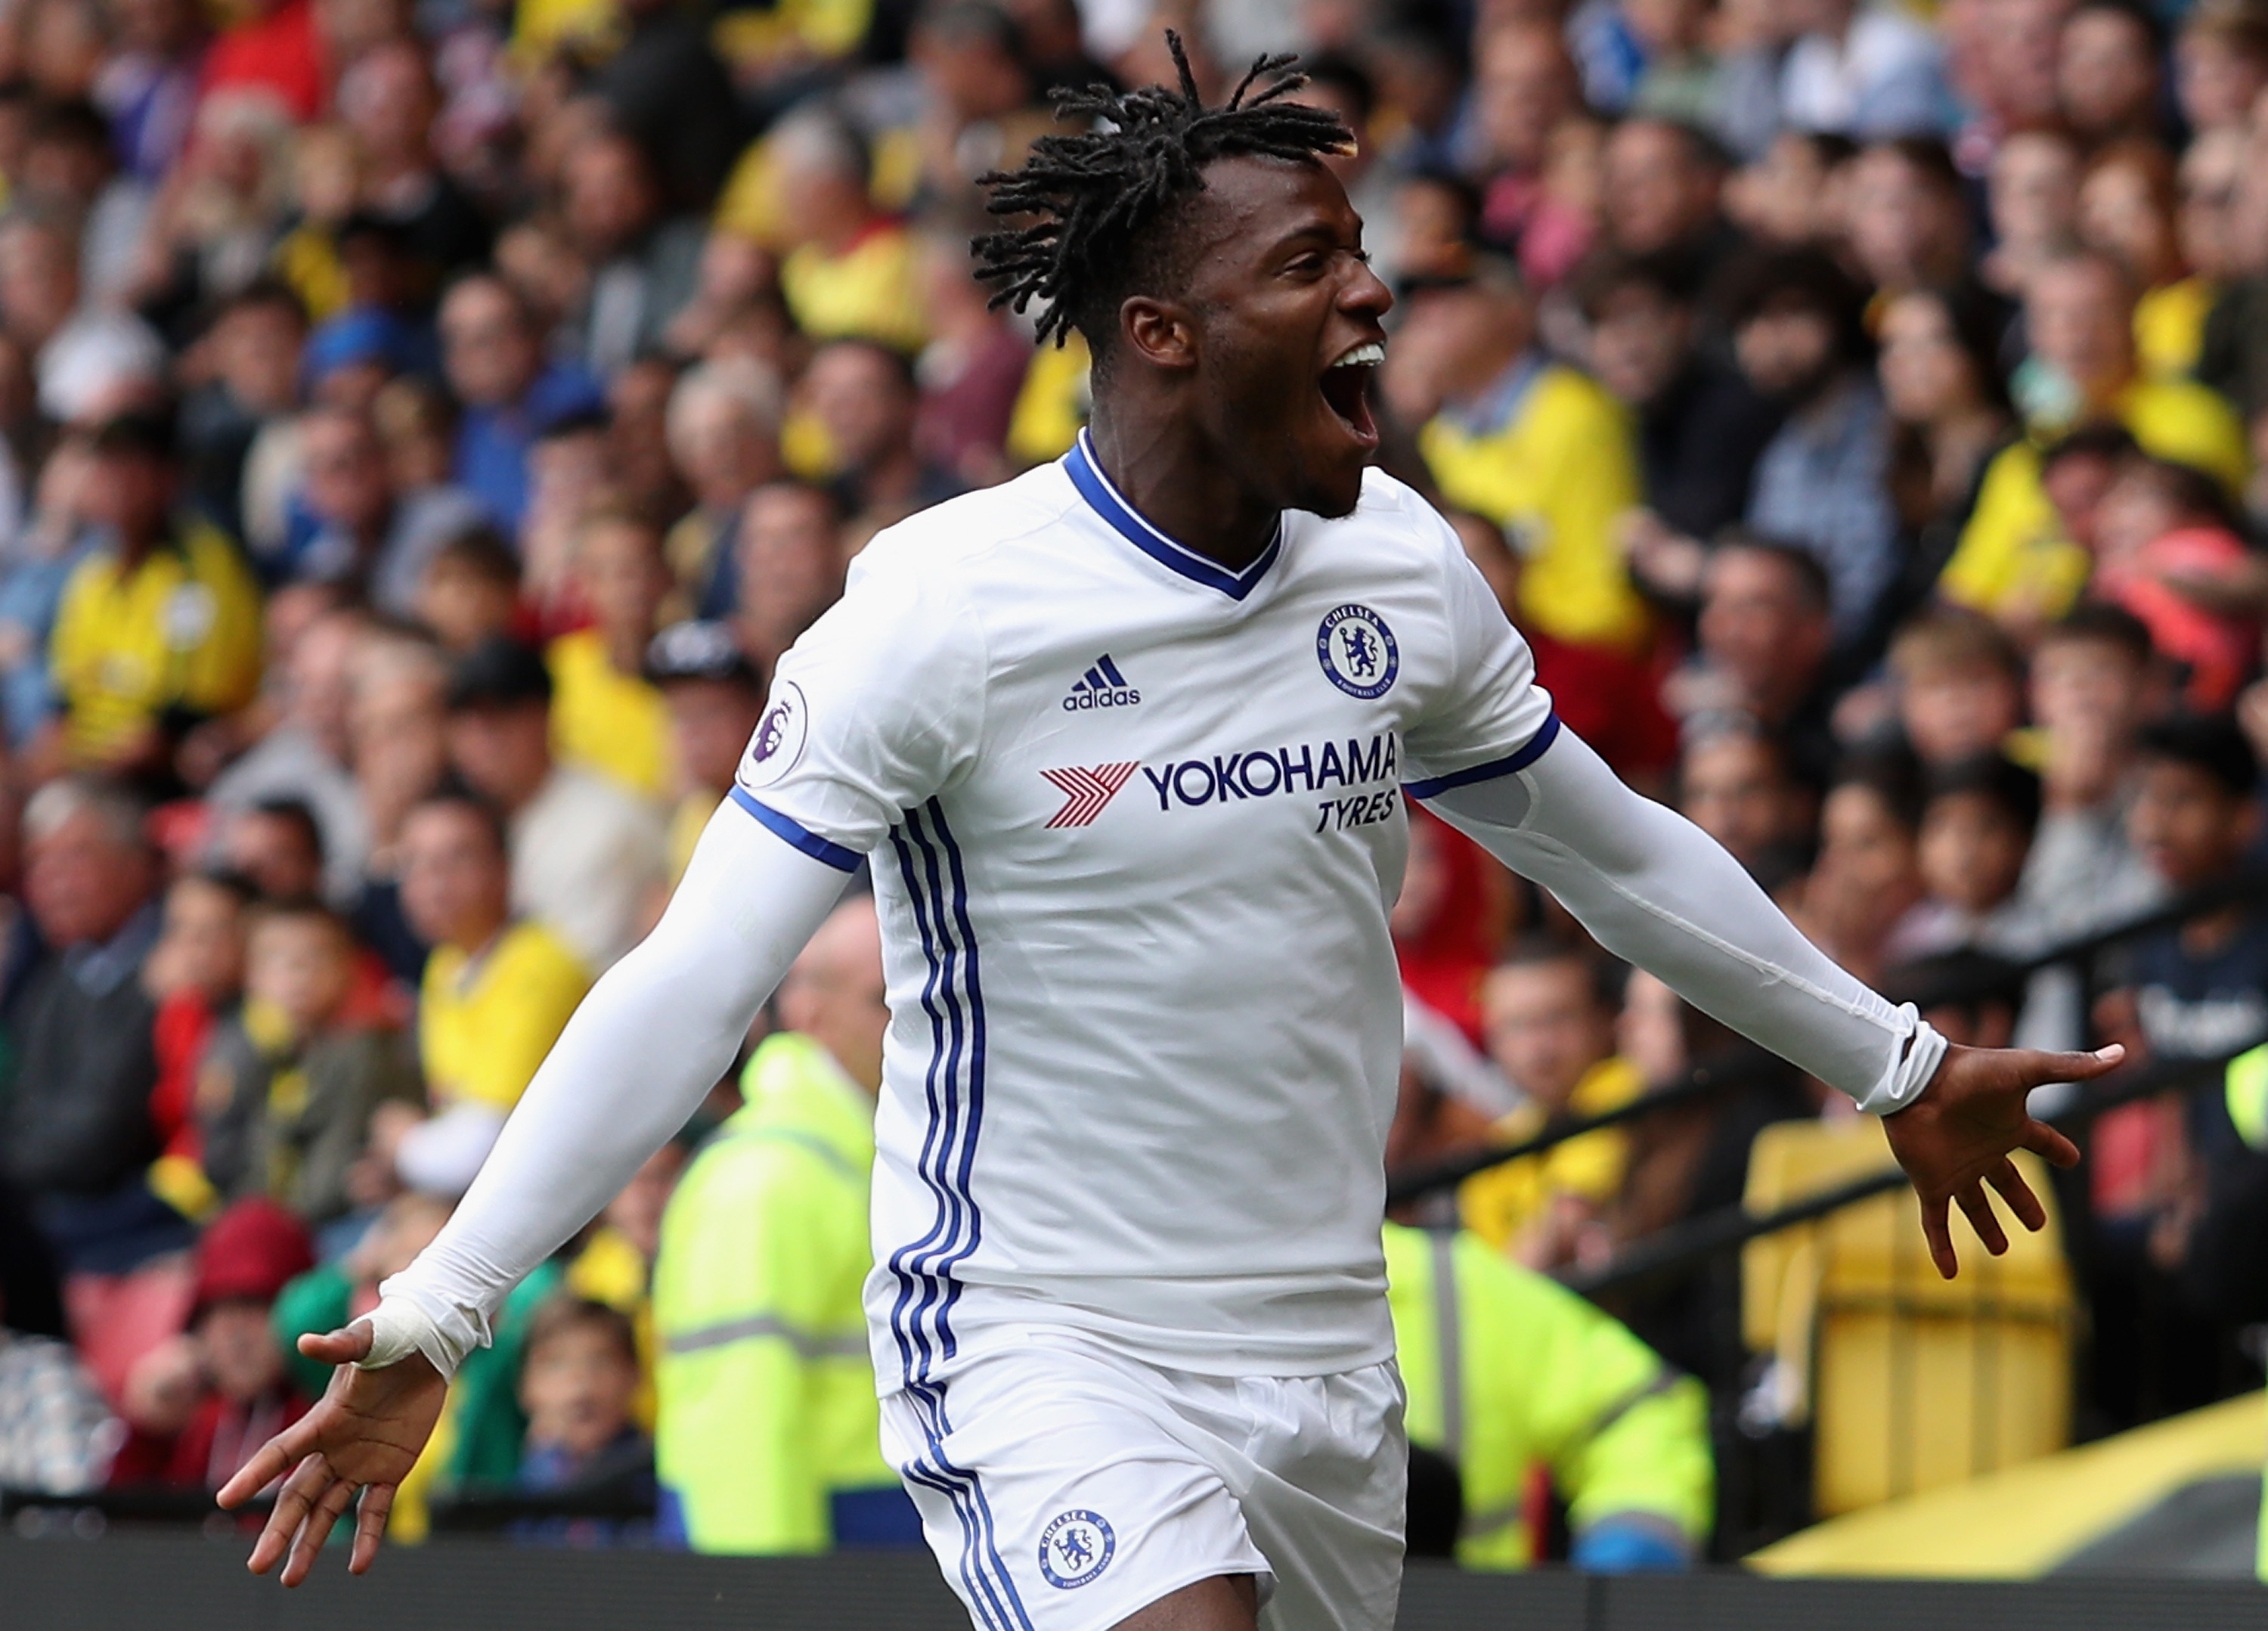 WATFORD, ENGLAND - AUGUST 20:  Michy Batshuayi of Chelsea celebratse scoring their first goal during the Premier League match between Watford and Chelsea at Vicarage Road on August 20, 2016 in Watford, England.  (Photo by Christopher Lee/Getty Images)